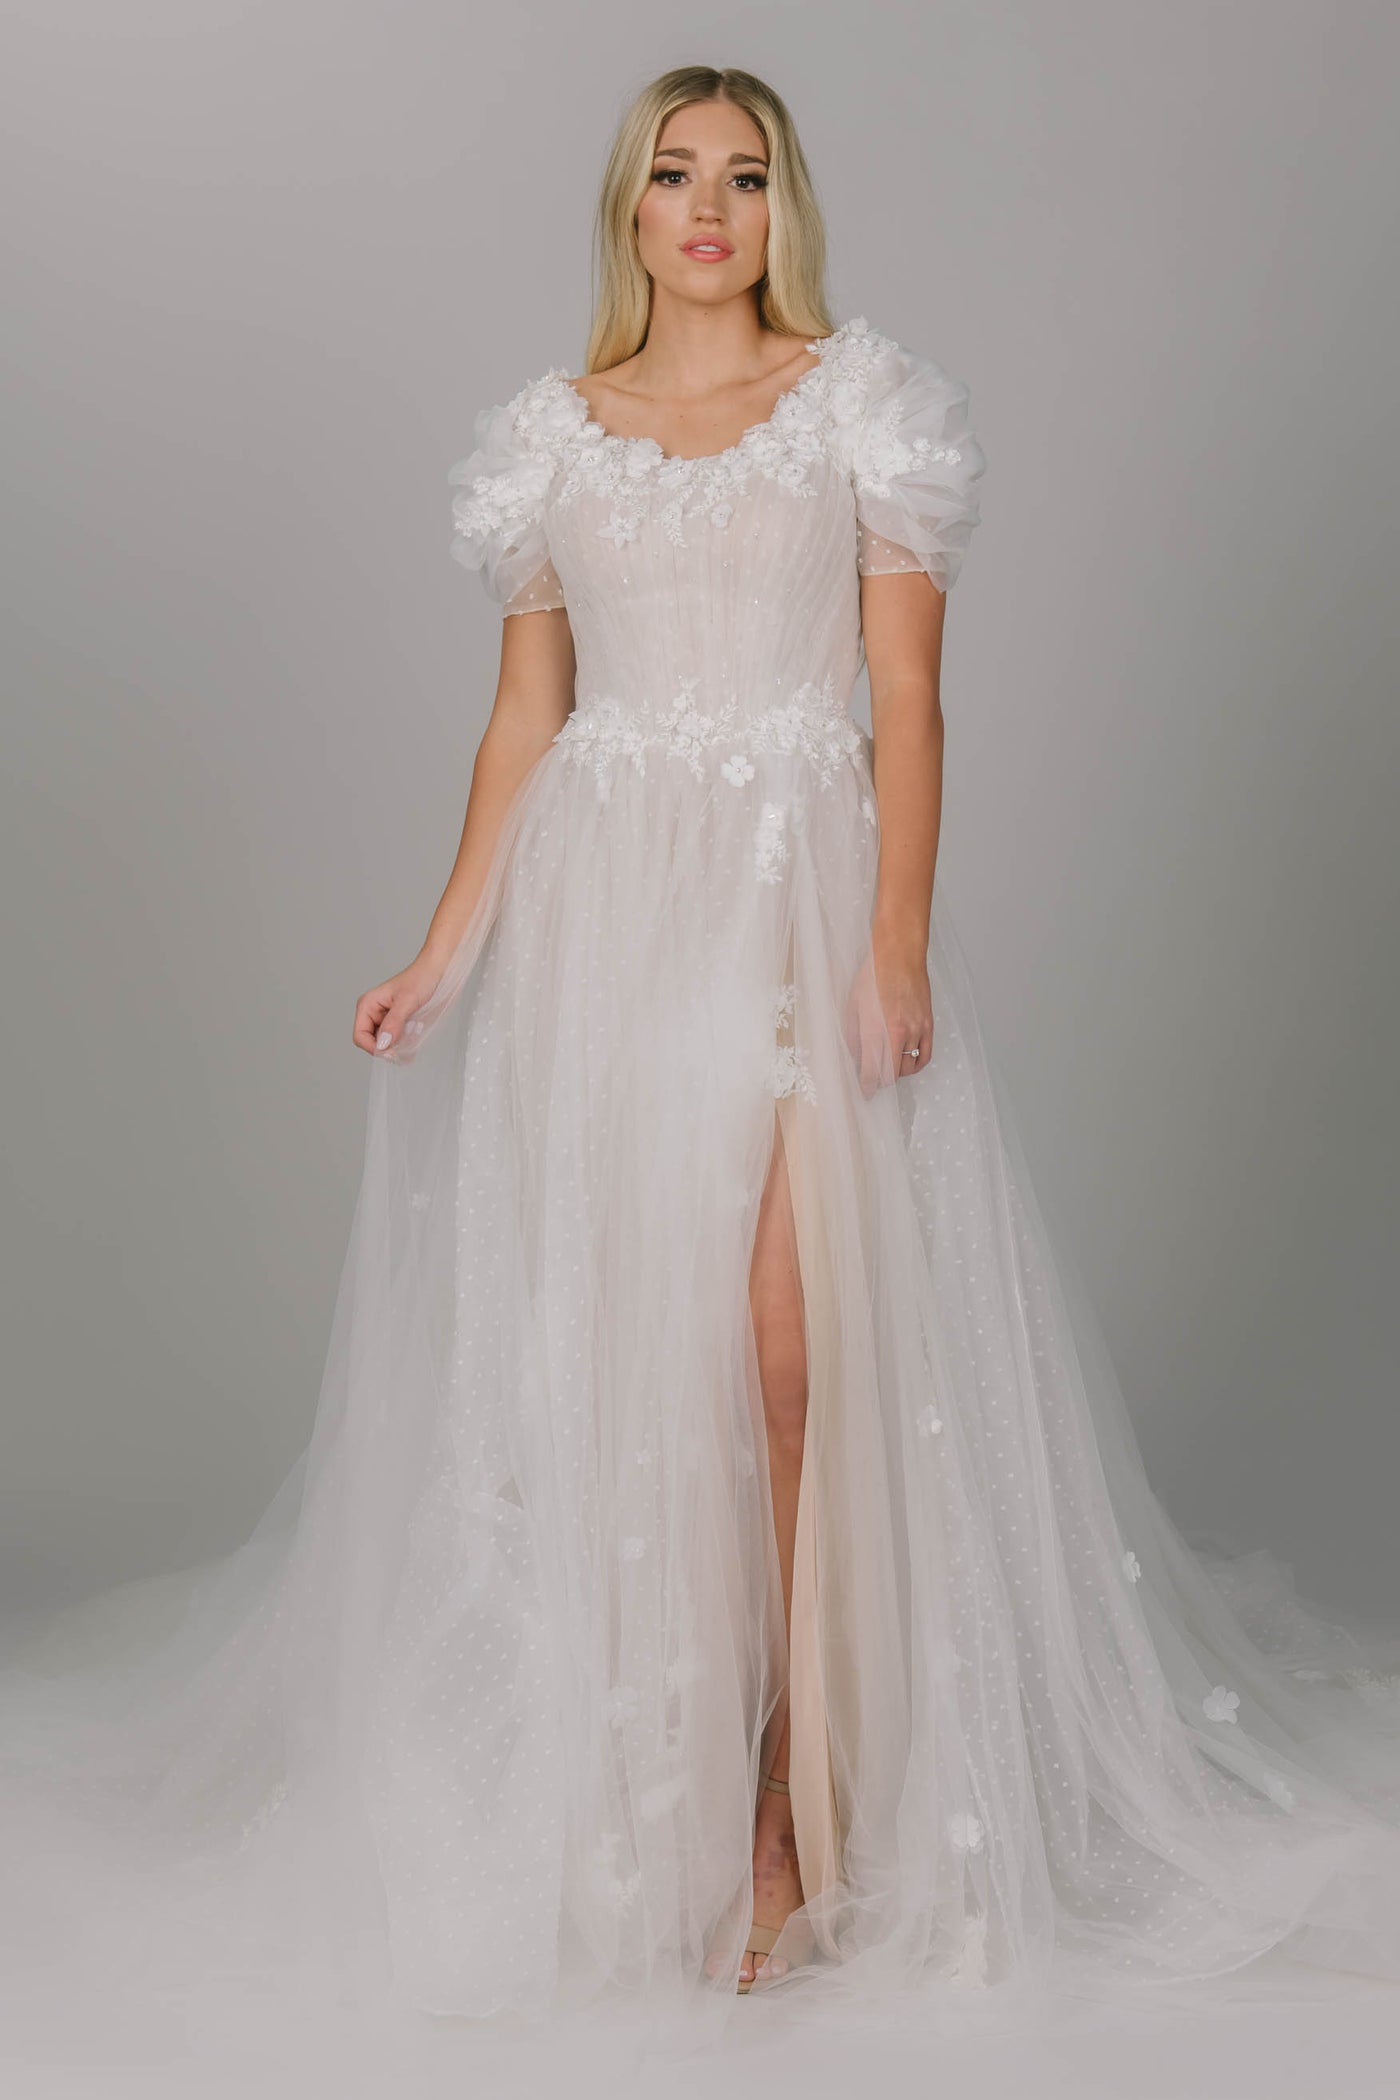 Dreamy modest wedding dress with puffed sleeves. It has a 3D flower lace that lines the scoop neckline. It has a slit and a lower train. It has multiple layers of tulle, of which one has polka dots. 